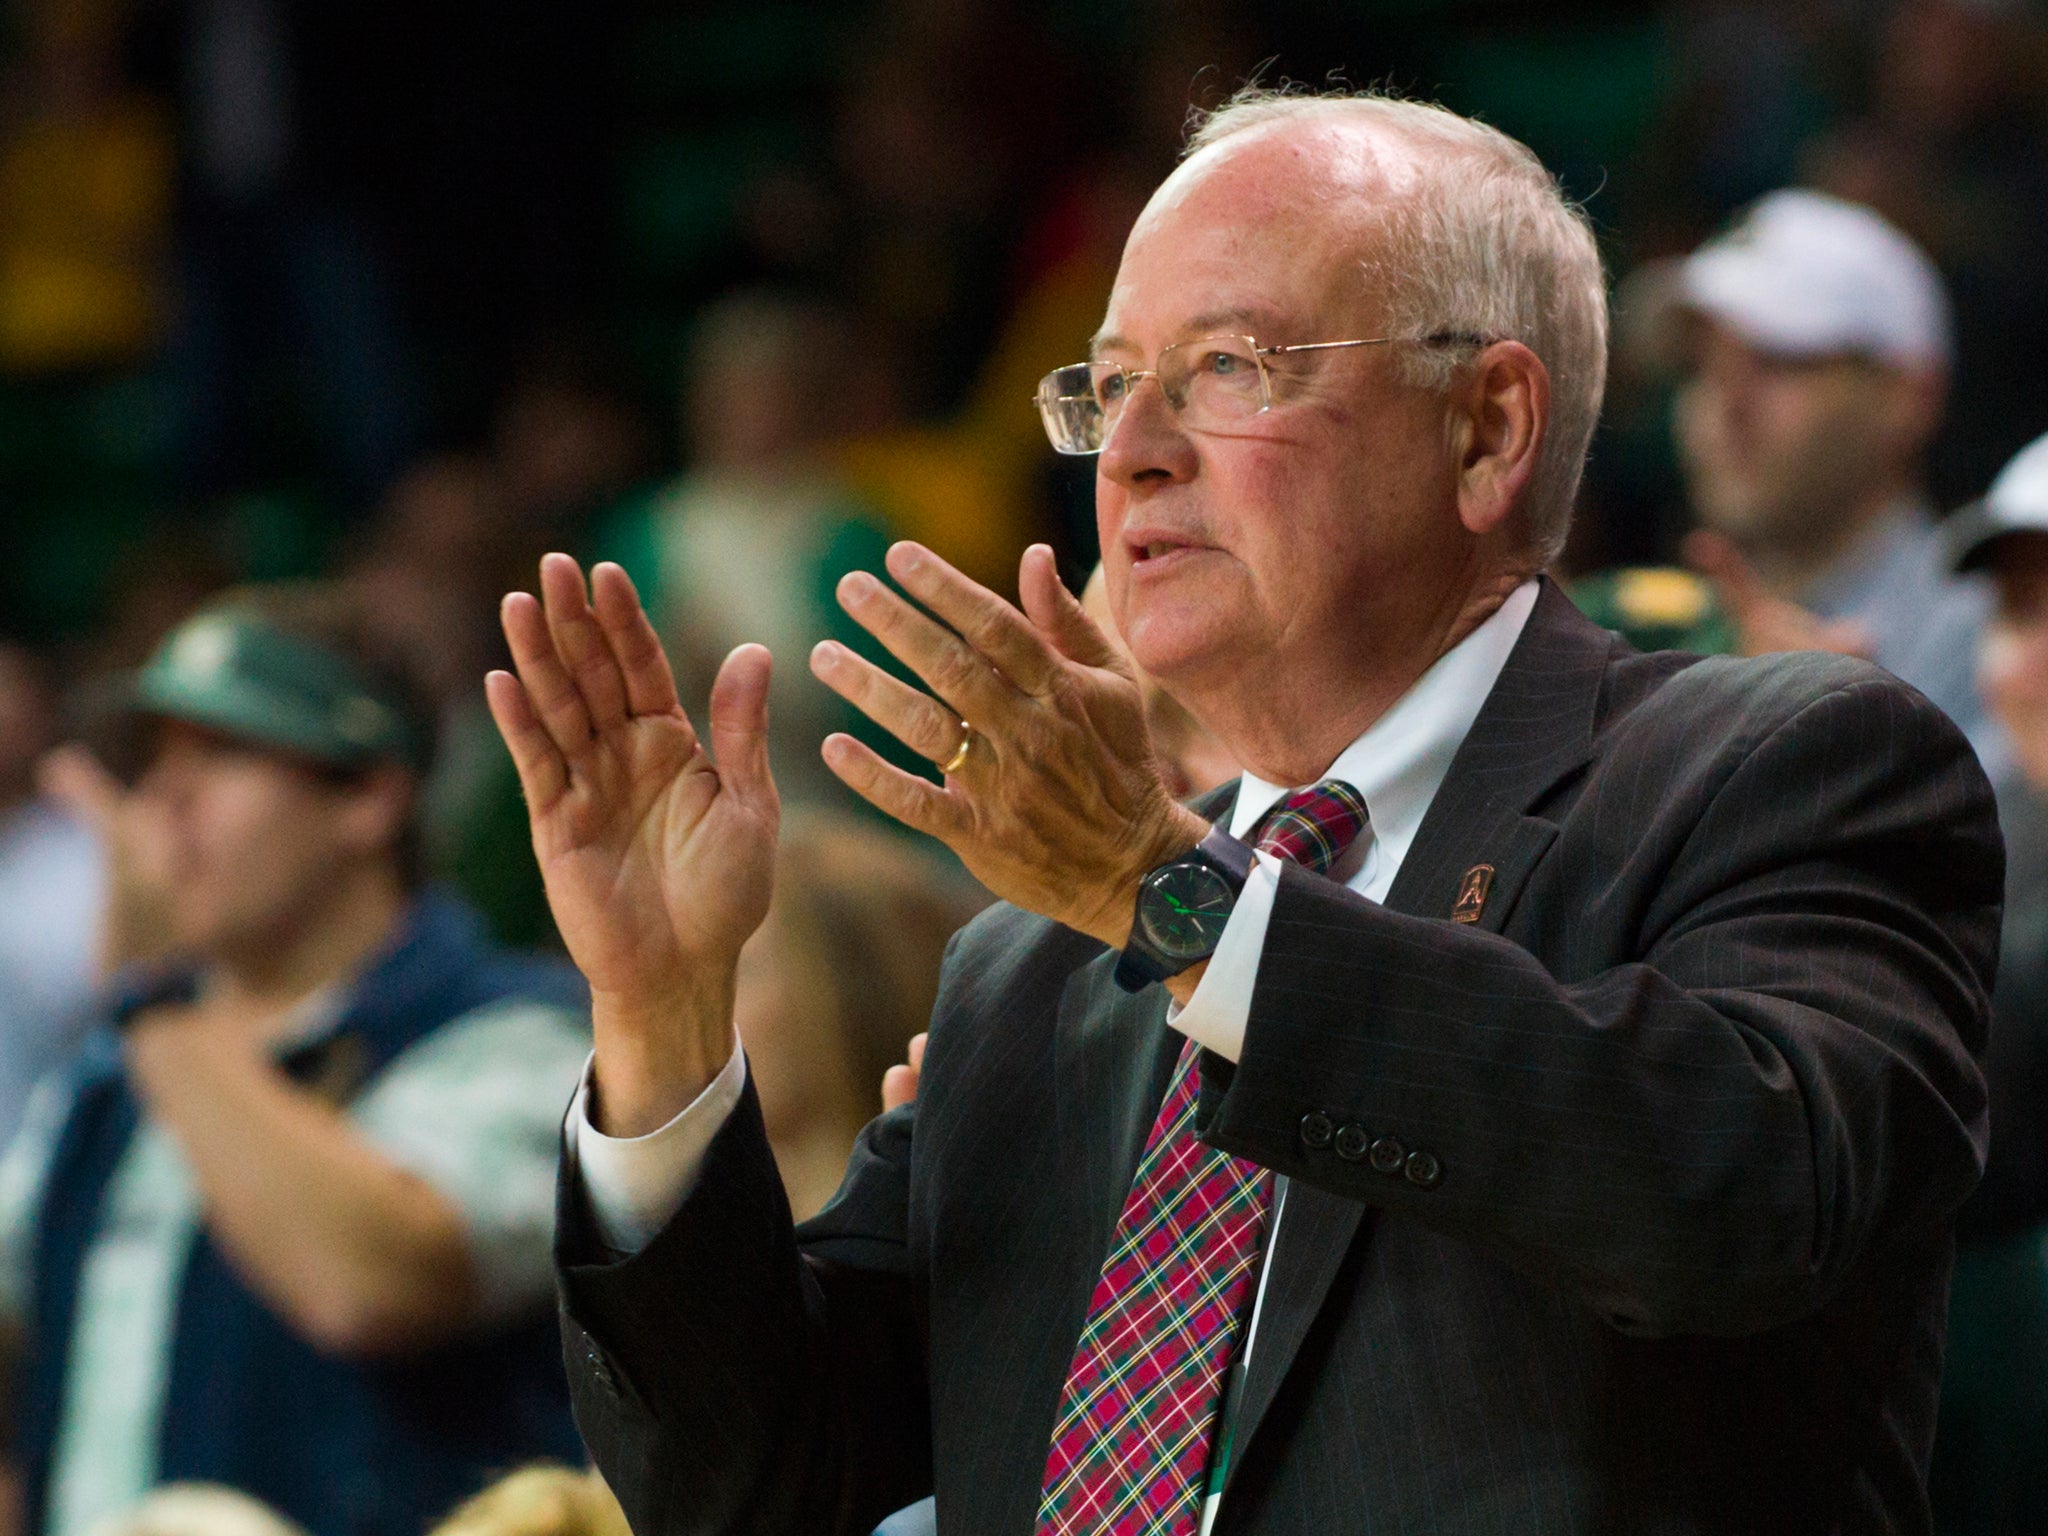 Ken Starr was named Baylor University's President and Chancellor in 2010 Cooper Neill/Getty